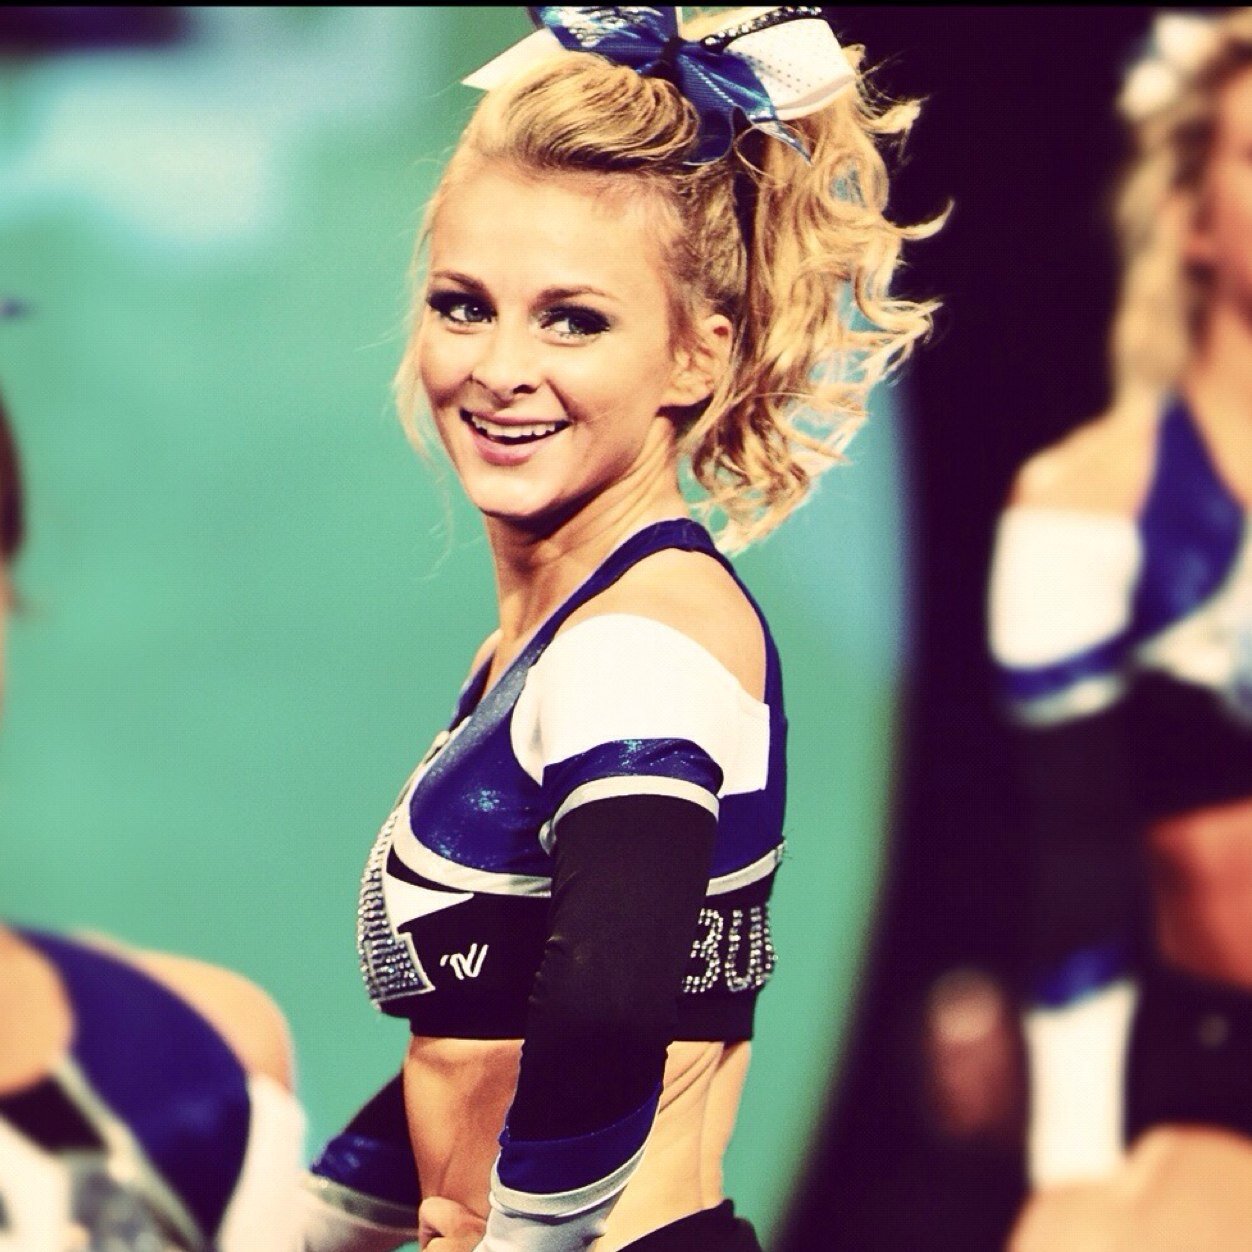 fiercest out there. F5 or die|#LBOD|bsb|wcss|cheetahs|babs|gbe|orange|nca champion